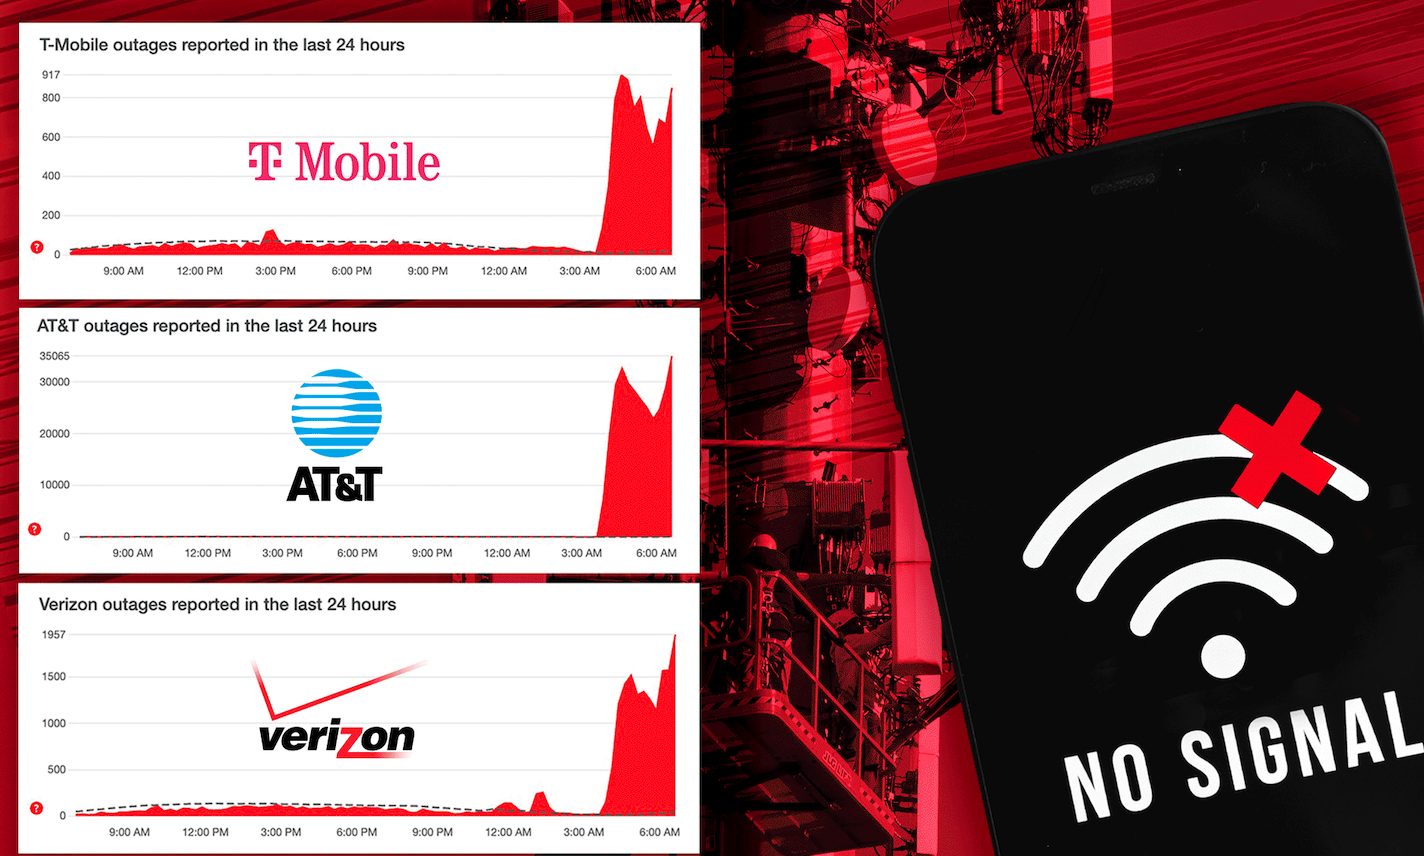 How Cell Service Outages Impact The Freight Economy